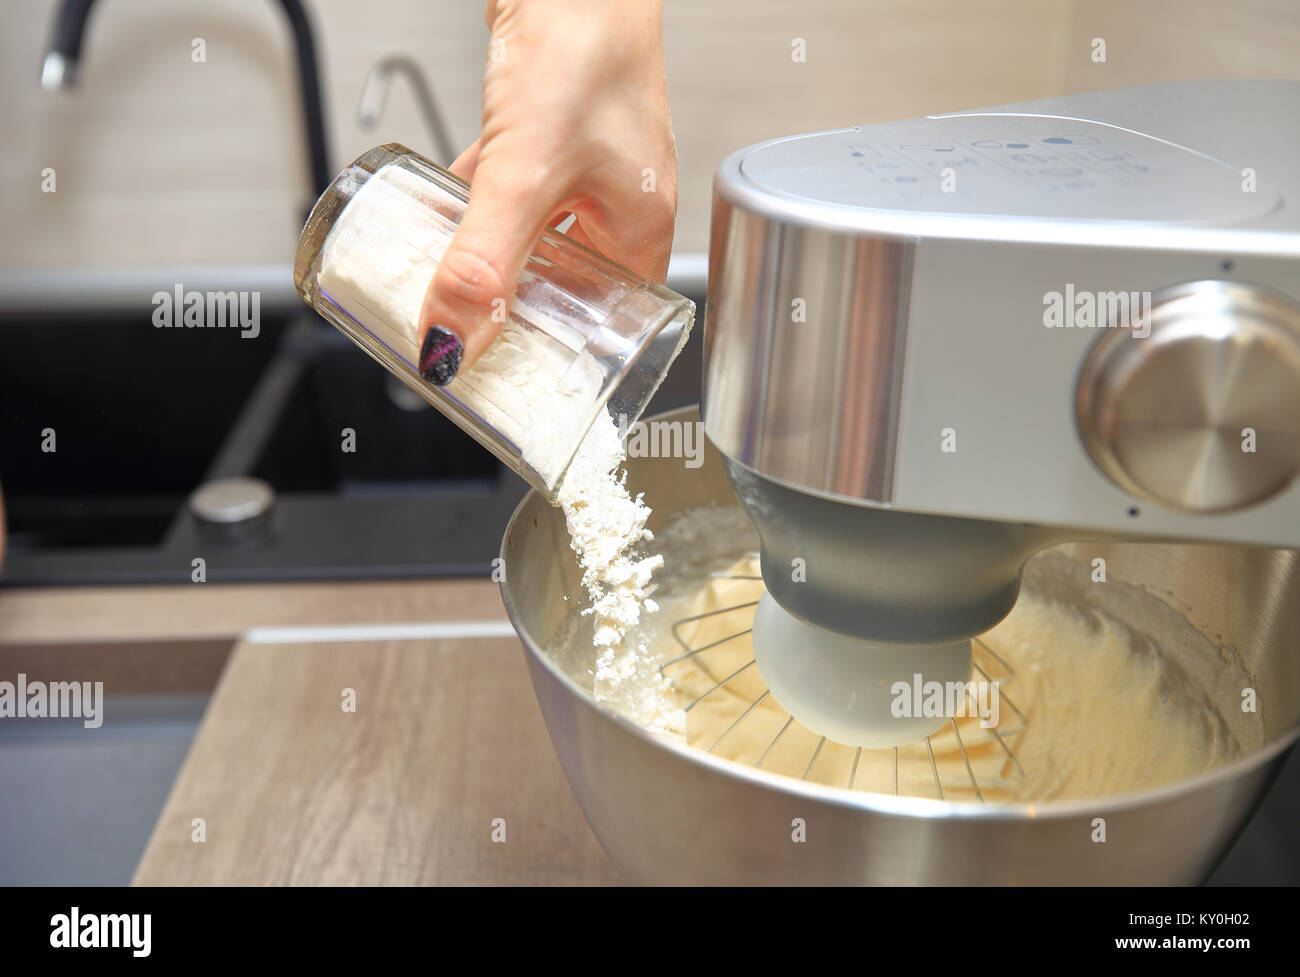 Flour pouring into bowl of food processor close-up. Mixing dough with professional food processor. Stock Photo